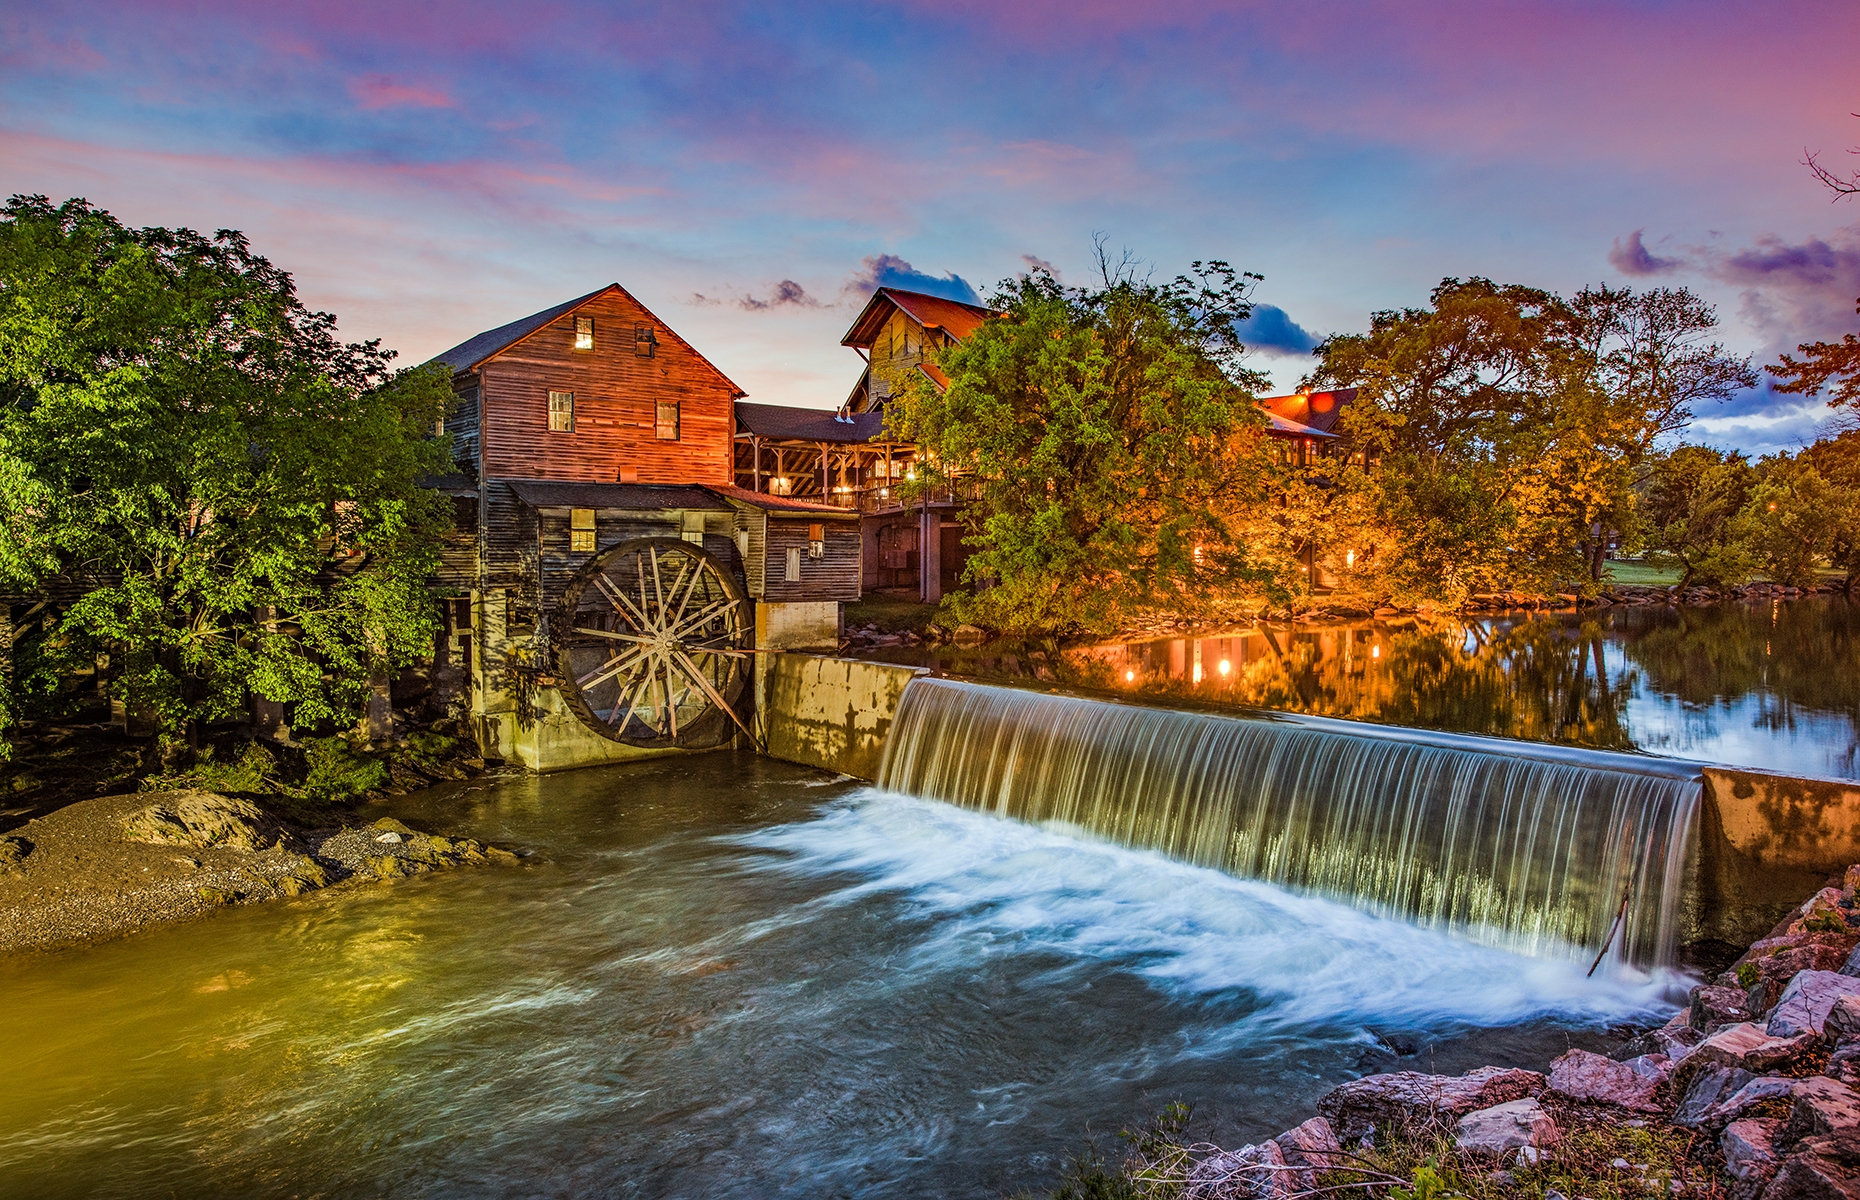 Old Mill Restaurant, Pigeon Forge, Tennessee. (Image: Kevin Ruck/Shutterstock)